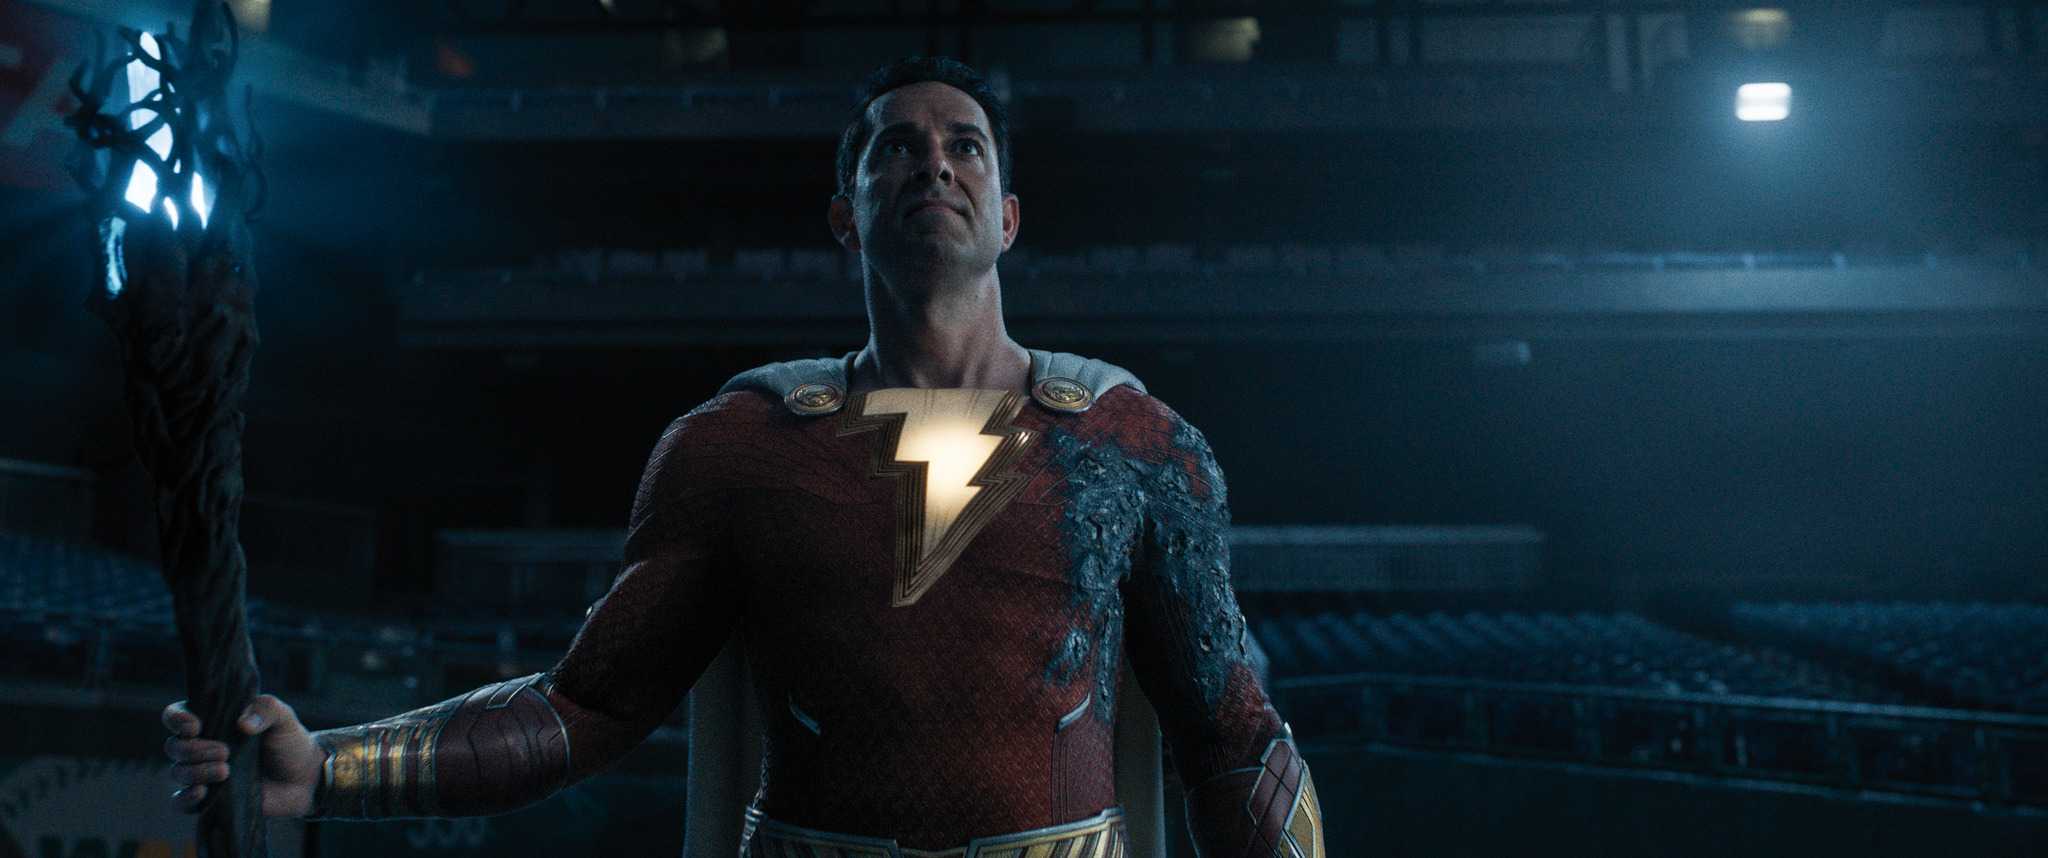 Shazam! Fury of the Gods Rotten Tomatoes score is out and, surprise surprise, critics and audiences are divided